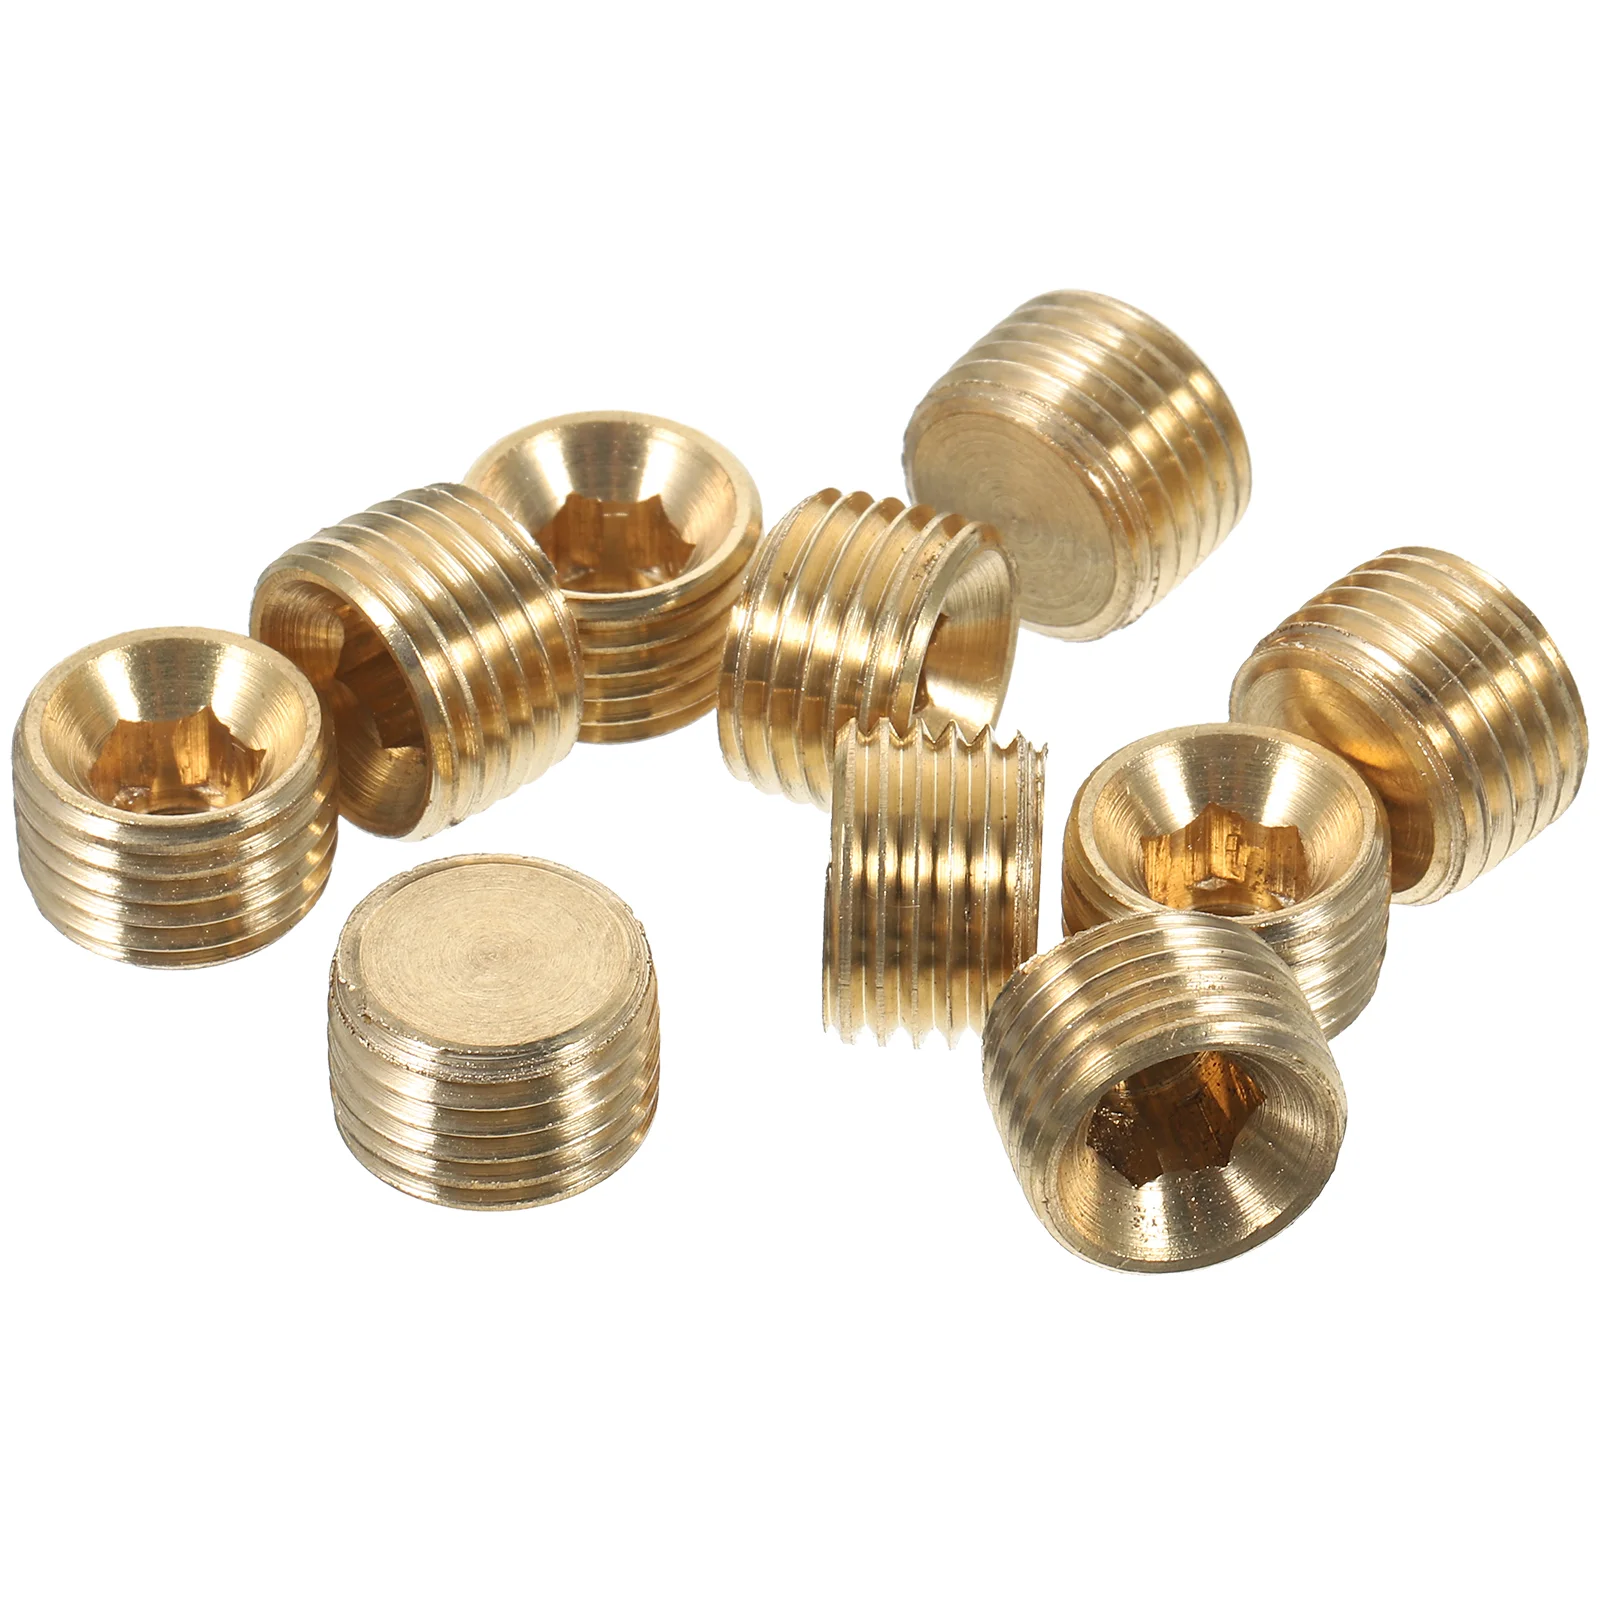 

Brass Cap Pipe Plug Water Plugs Adapter Coupling 1/4 Npt End Caps Fittings Saver Kits